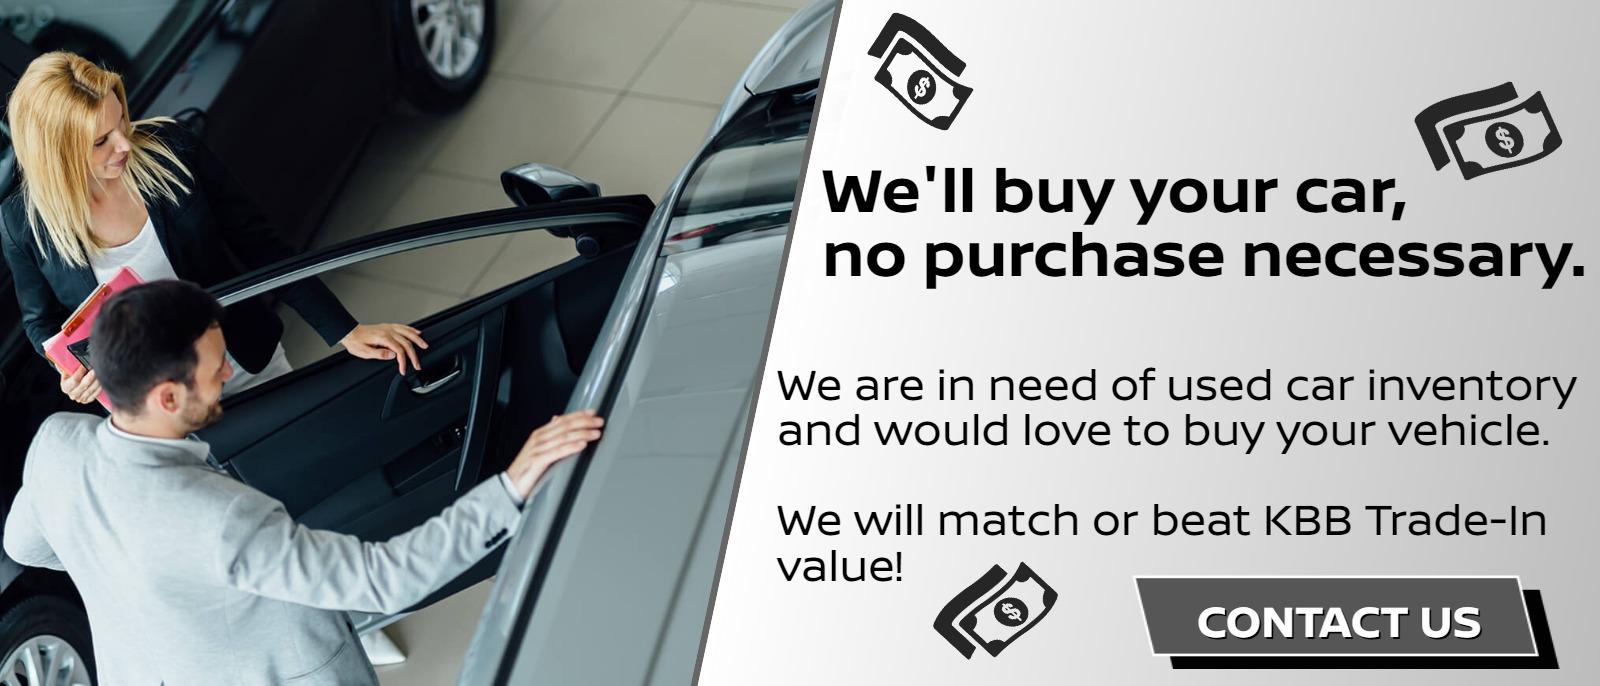 We'll buy your car, no purchase necessary.